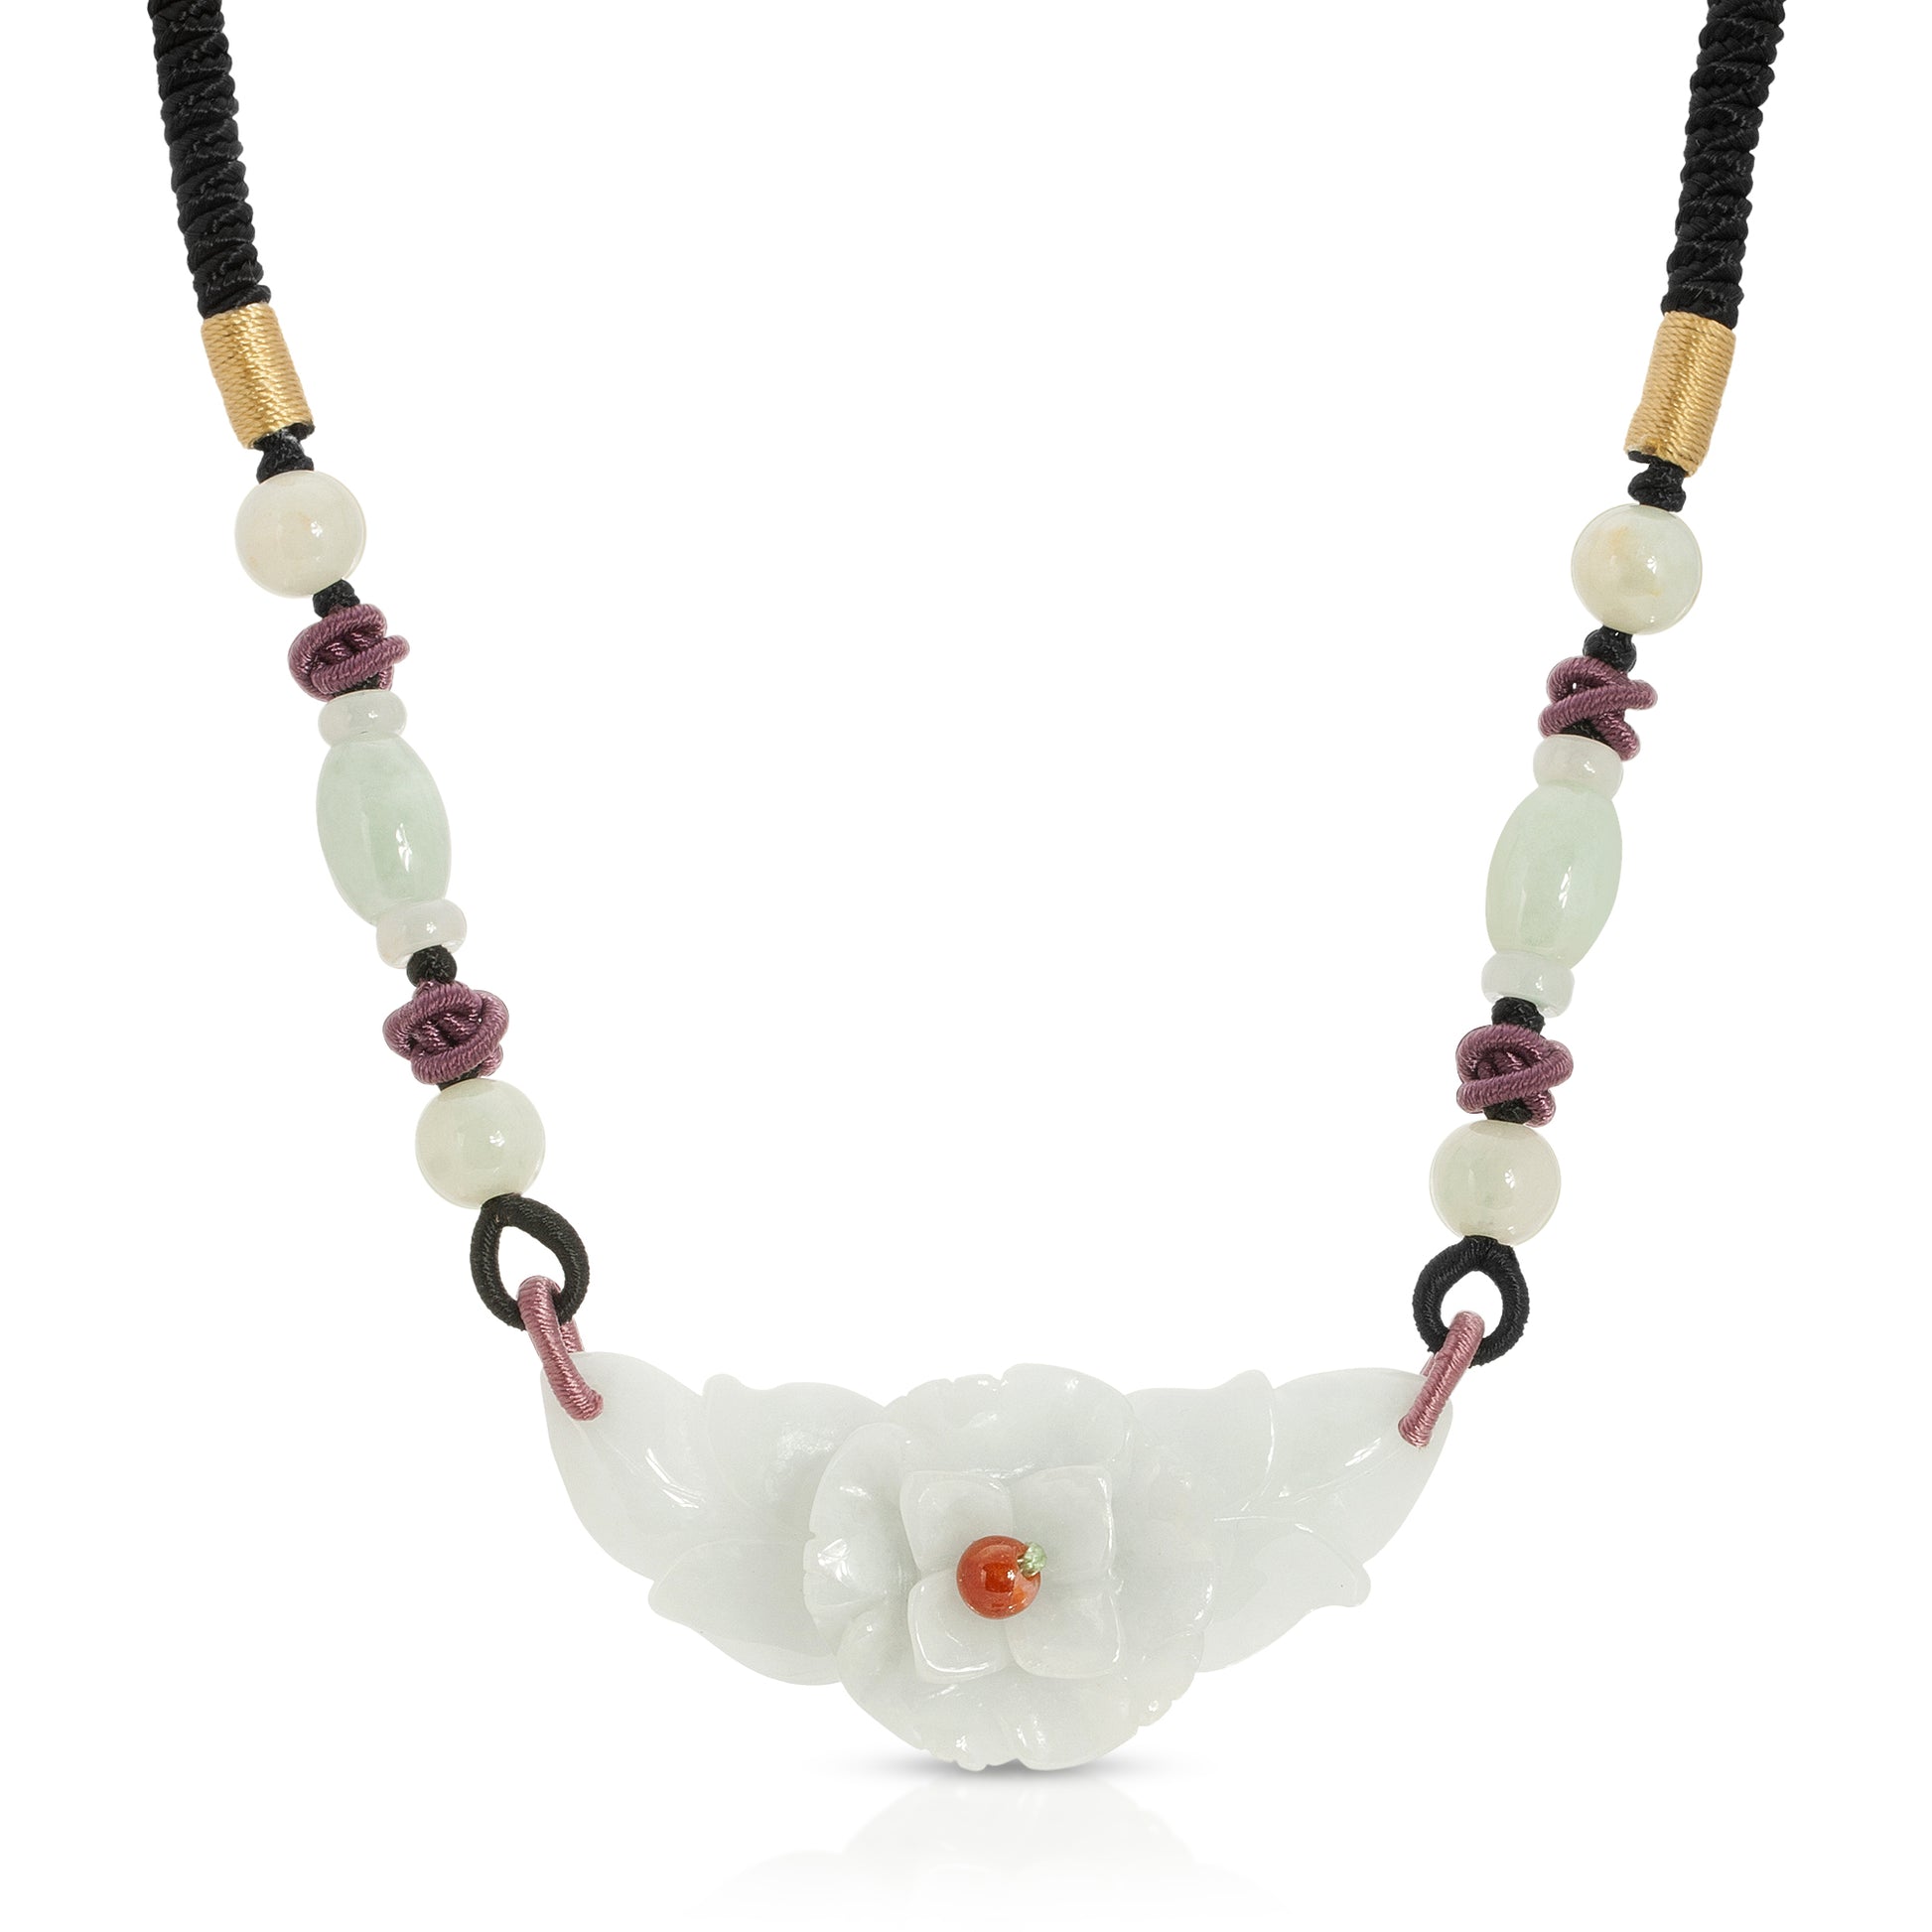 Discover Your True Beauty with a Fortune Flower Handmade Jade Necklace made with Black Cord